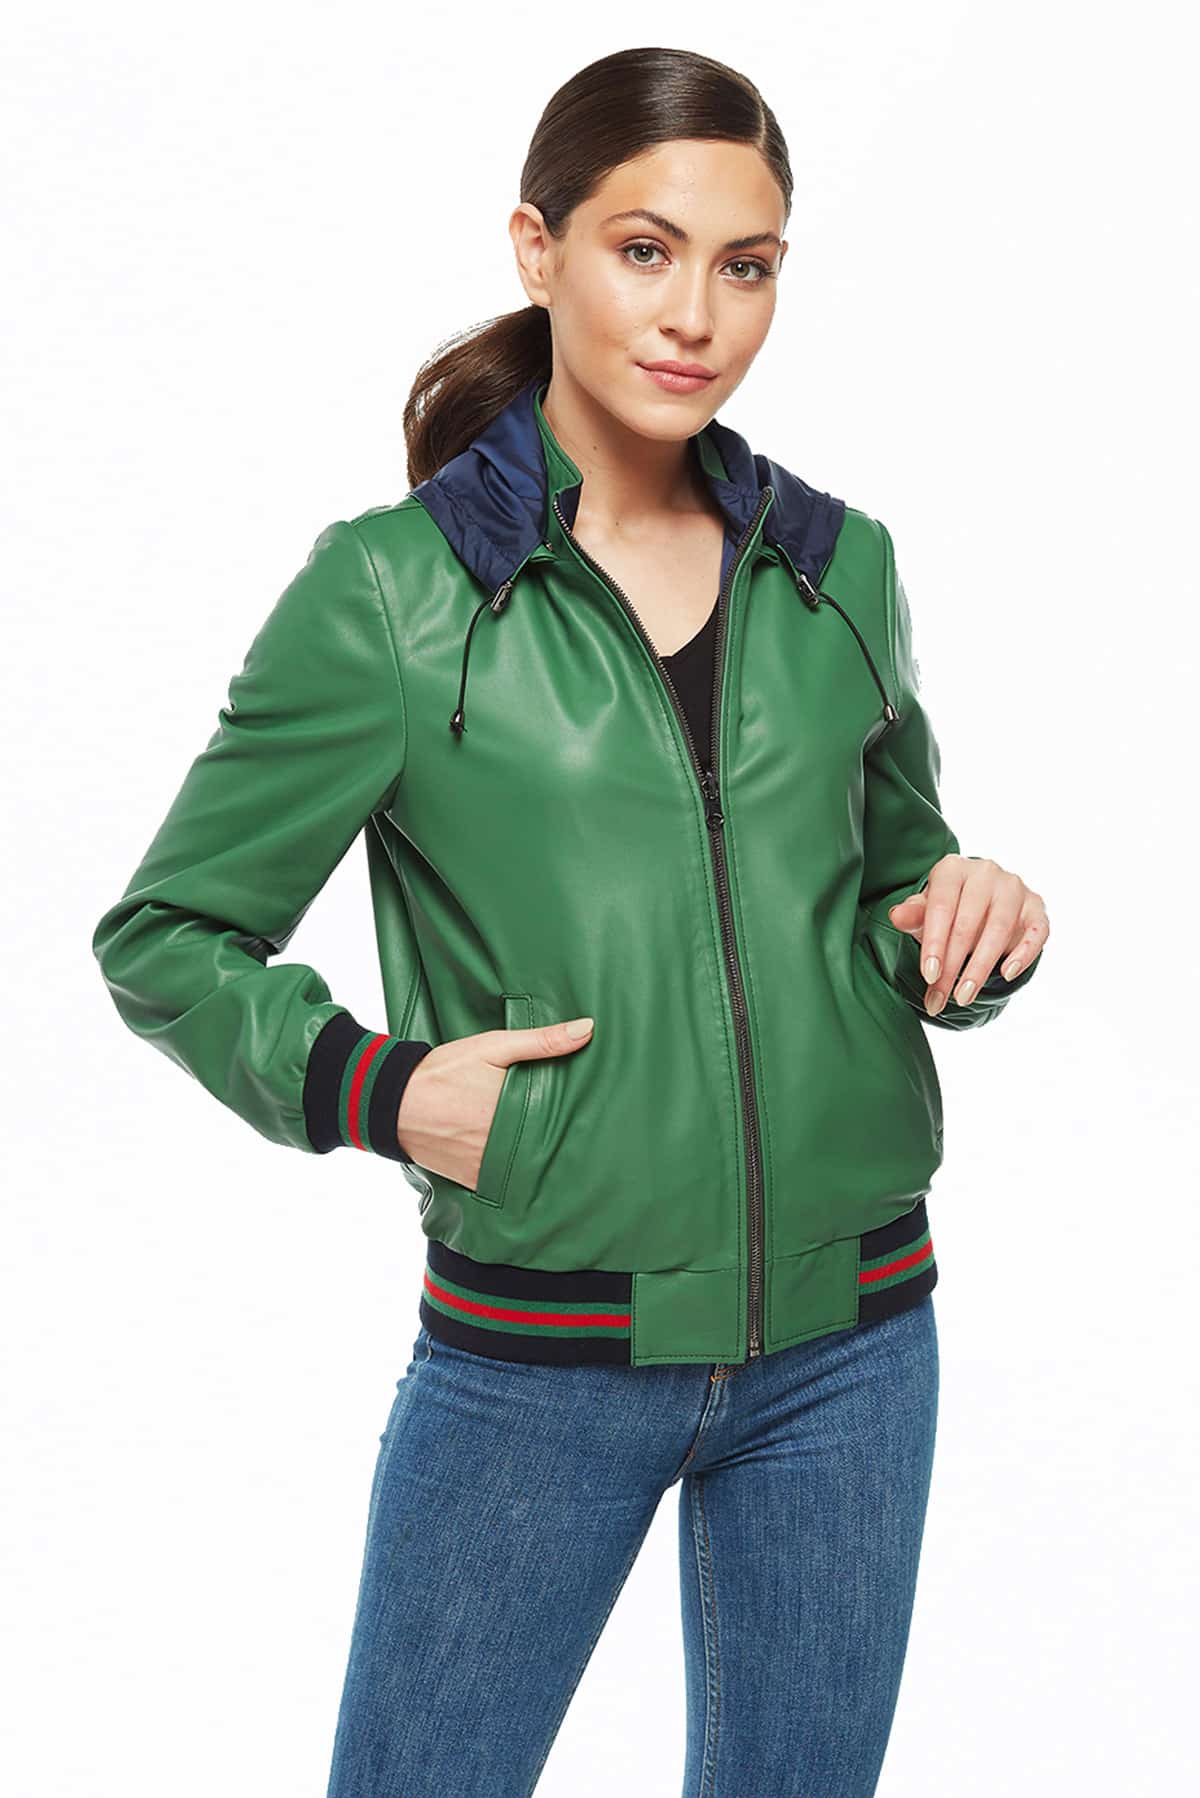 Womens Green Bomber Leather Jacket